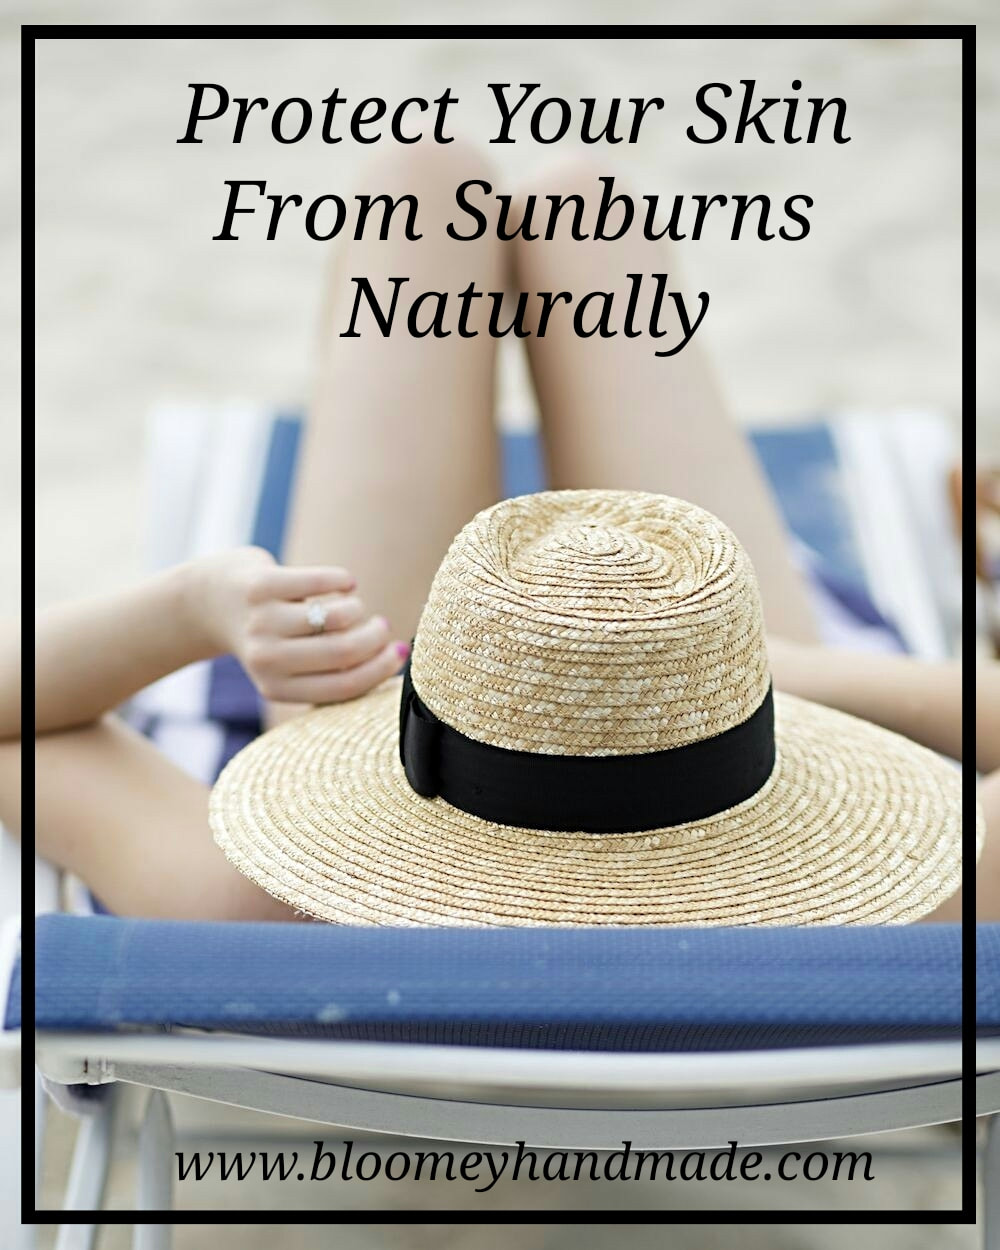 Protect your skin from sunburns naturally